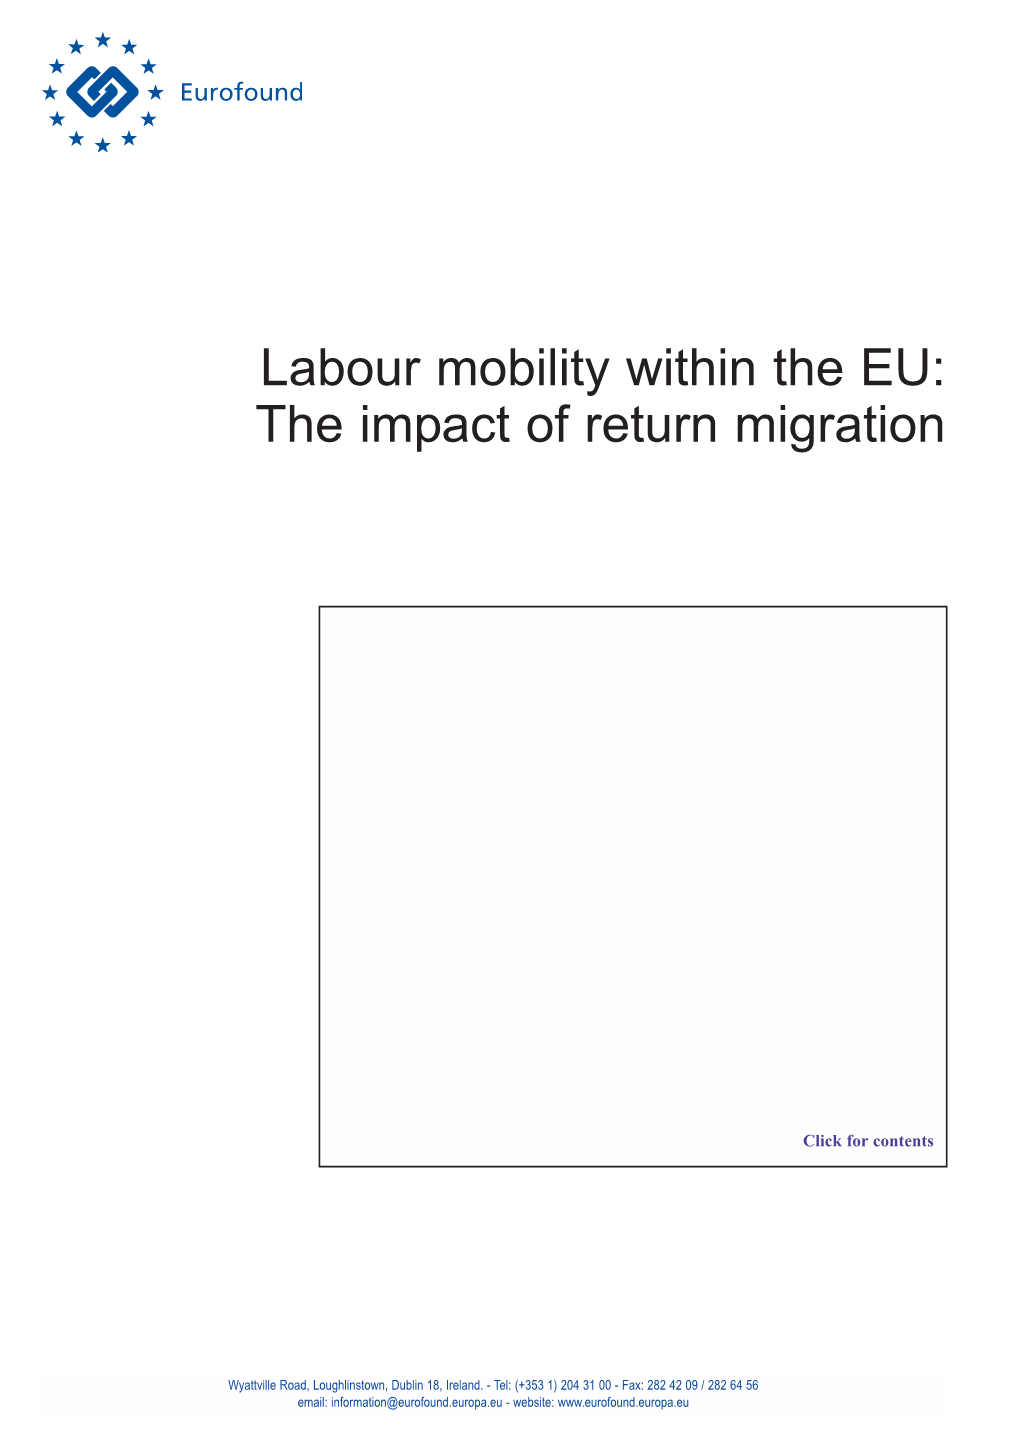 Labour Mobility Within the EU: the Impact of Return Migration